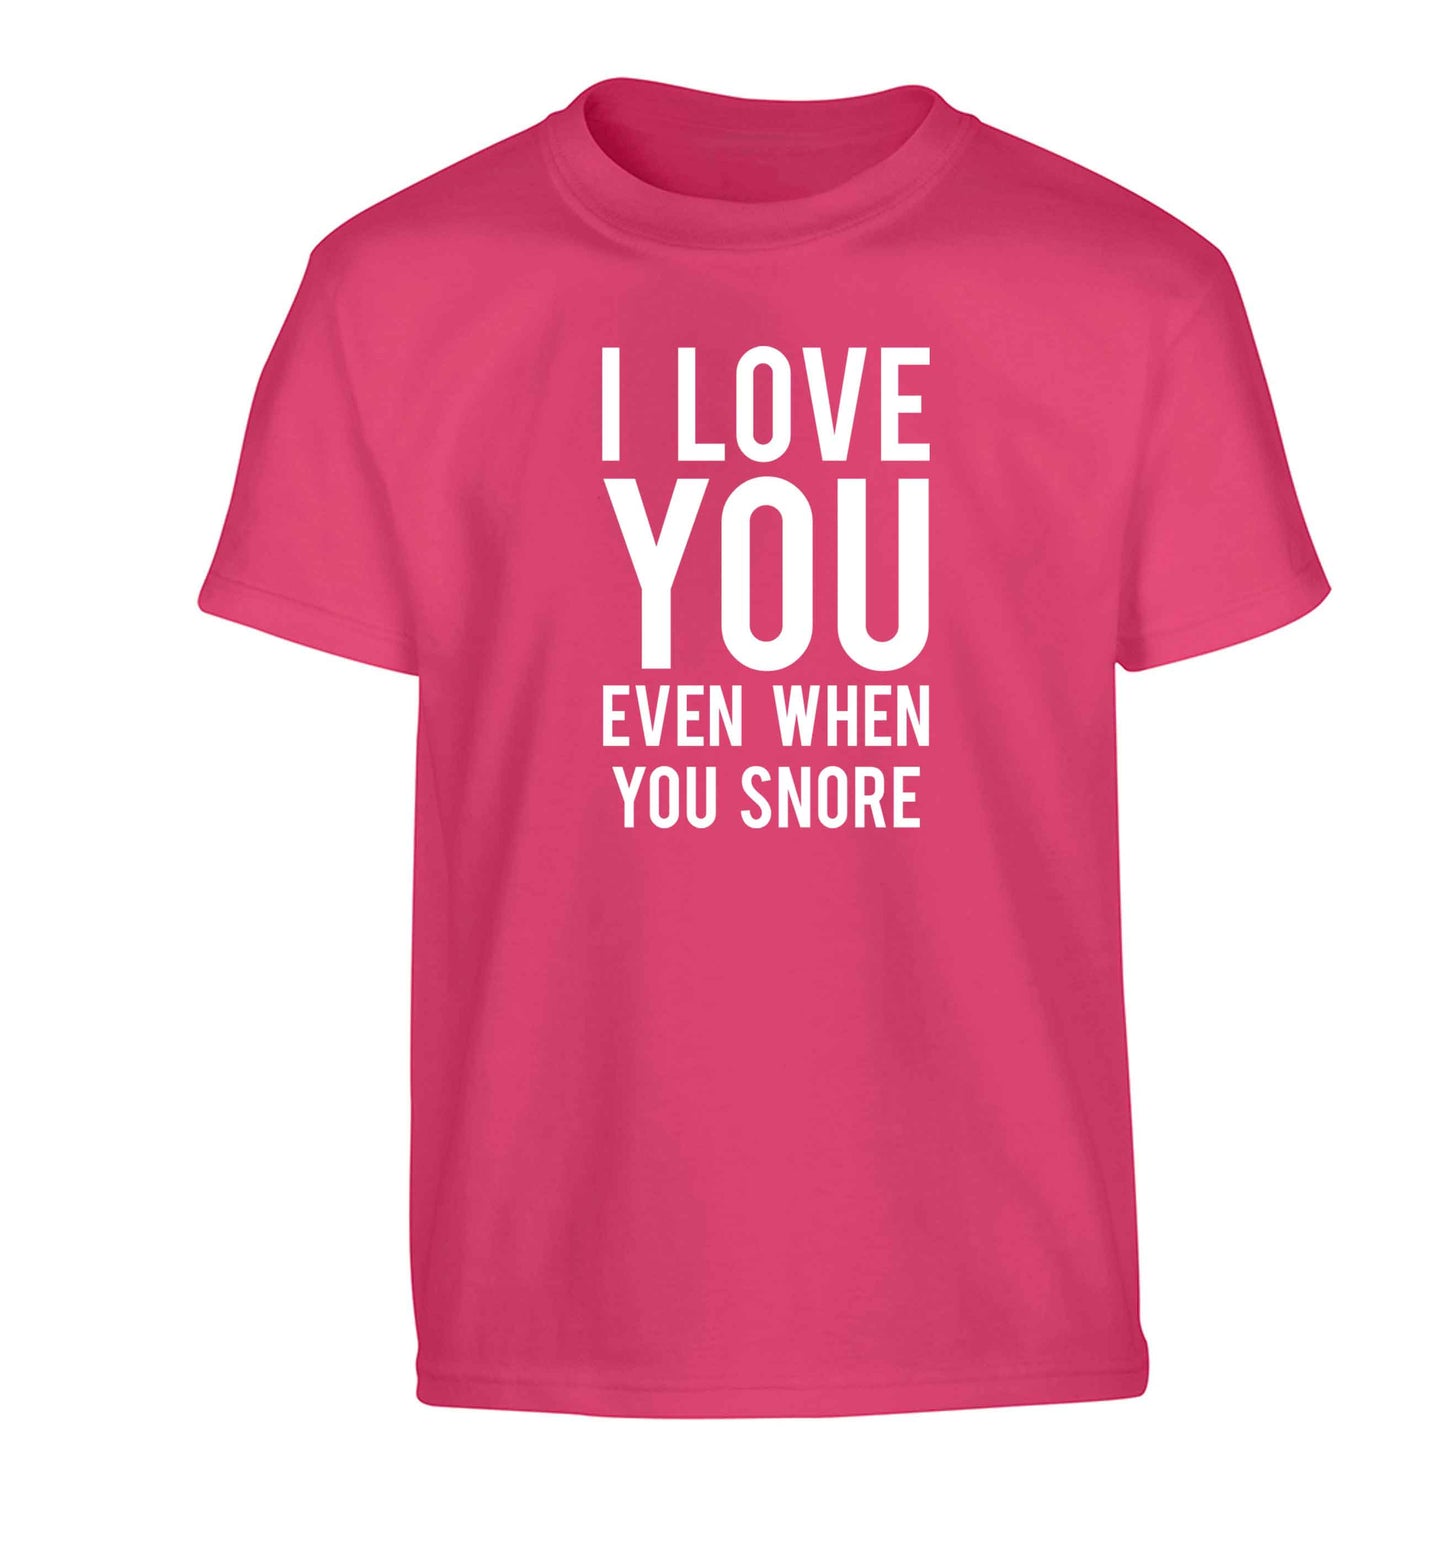 I love you even when you snore Children's pink Tshirt 12-13 Years